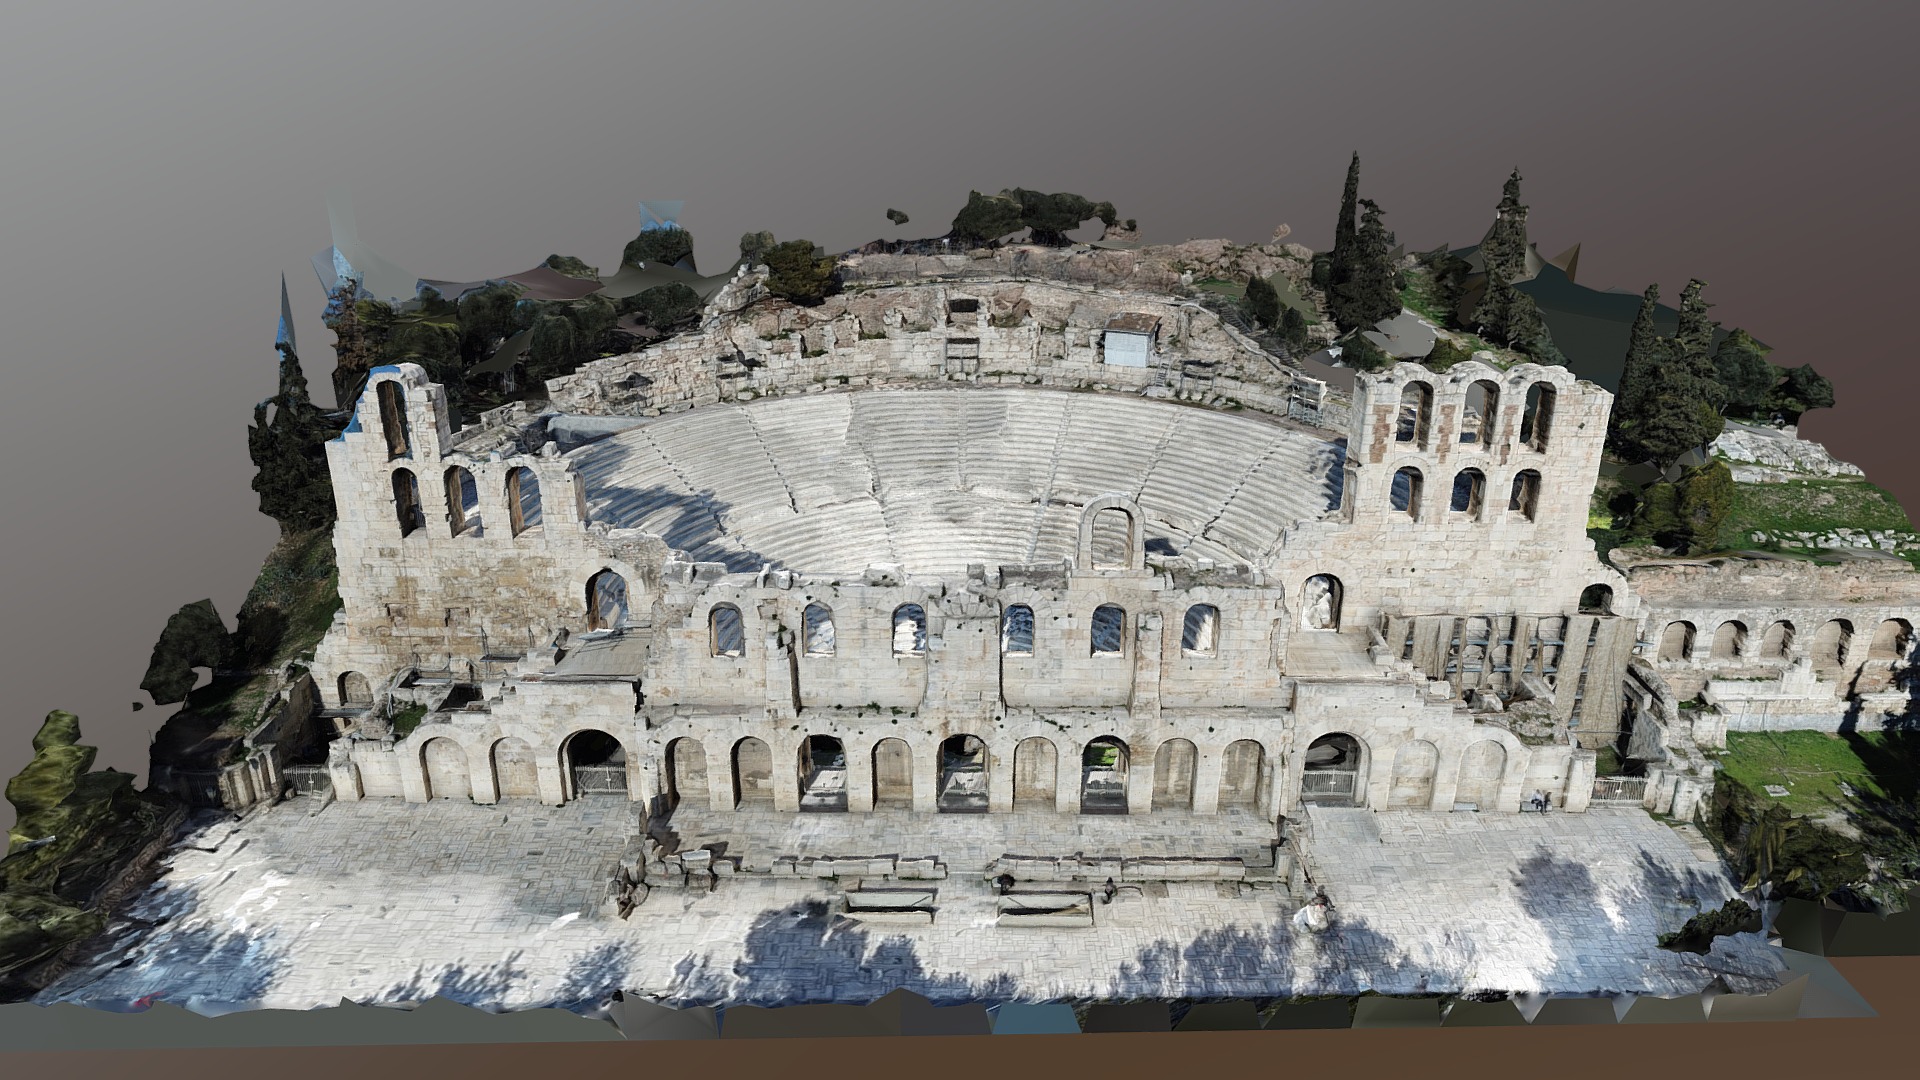 Odeon of Herodes Atticus, 161AD, Athens Greece.  http://odysseus.culture.gr/h/2/eh251.jsp?obj_id=6622 Let's digitize the world and share it :) - Ancient greek theater Acropolis - Download Free 3D model by theovasilis 3d model